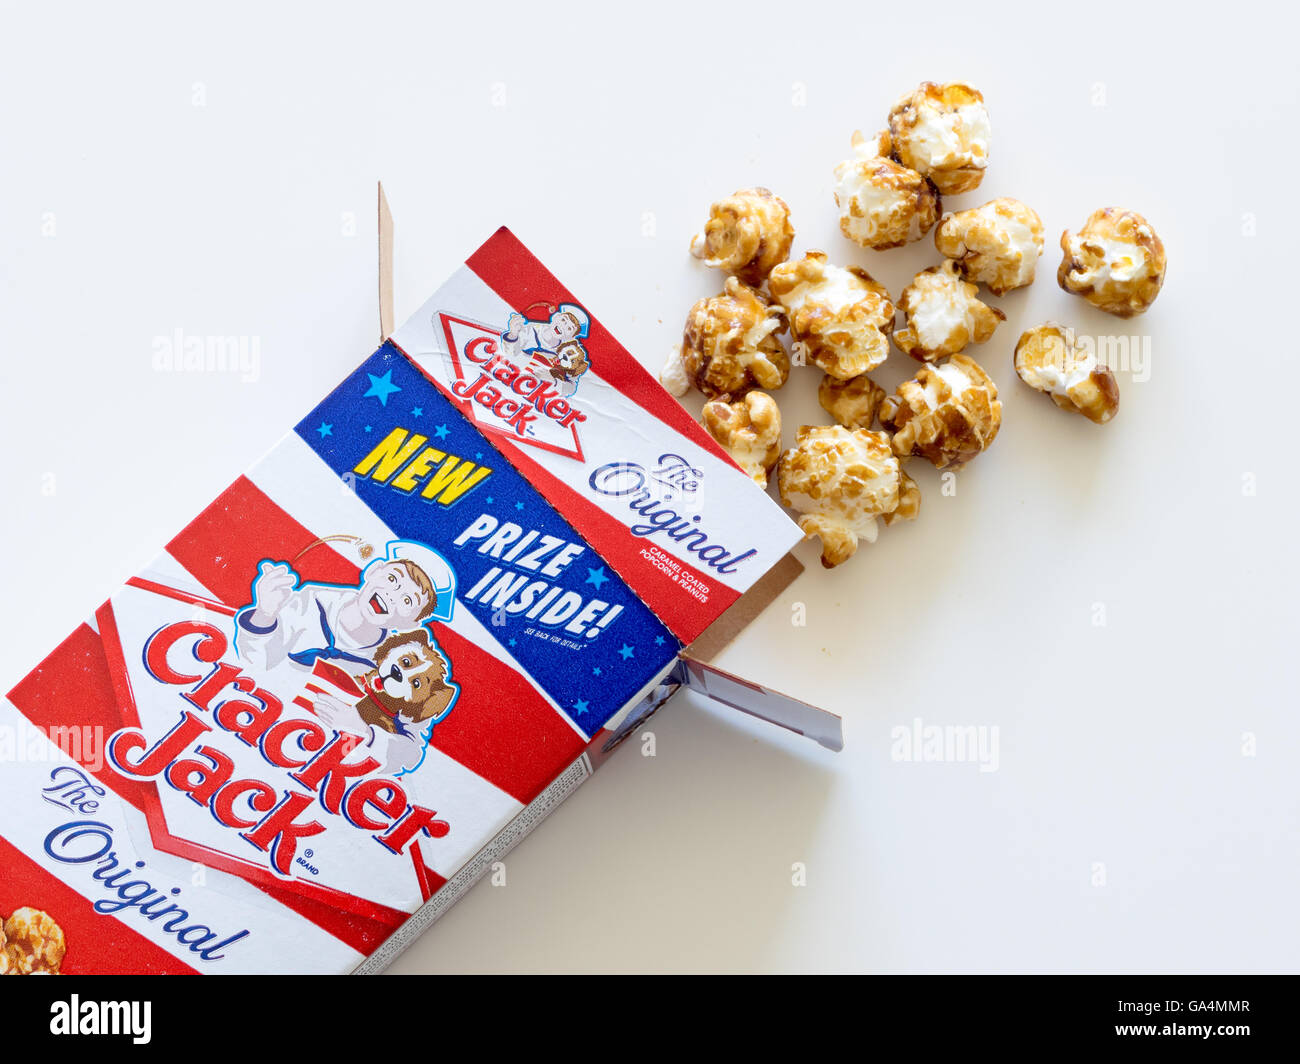 A box of Cracker Jack, an American snack consisting of molasses-flavoured caramel-coated popcorn and peanuts. Stock Photo